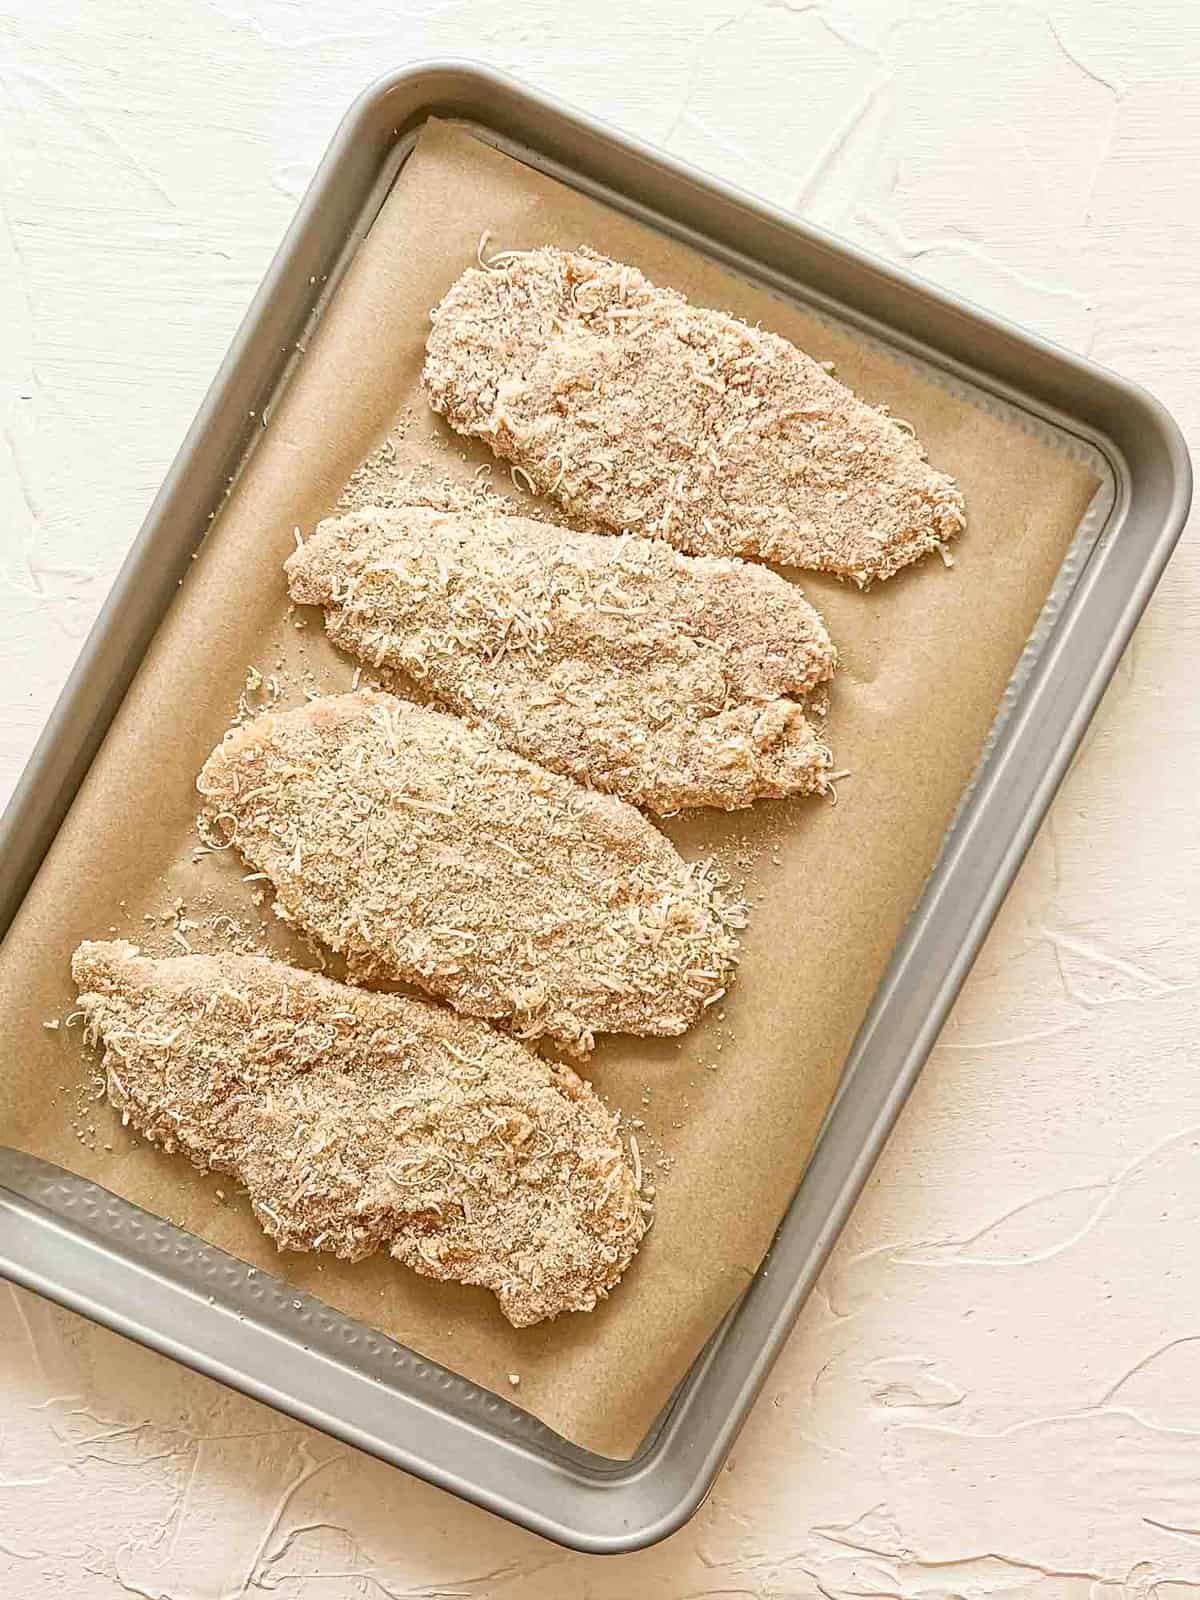 Raw breaded chicken breasts on baking sheet ready to be baked.